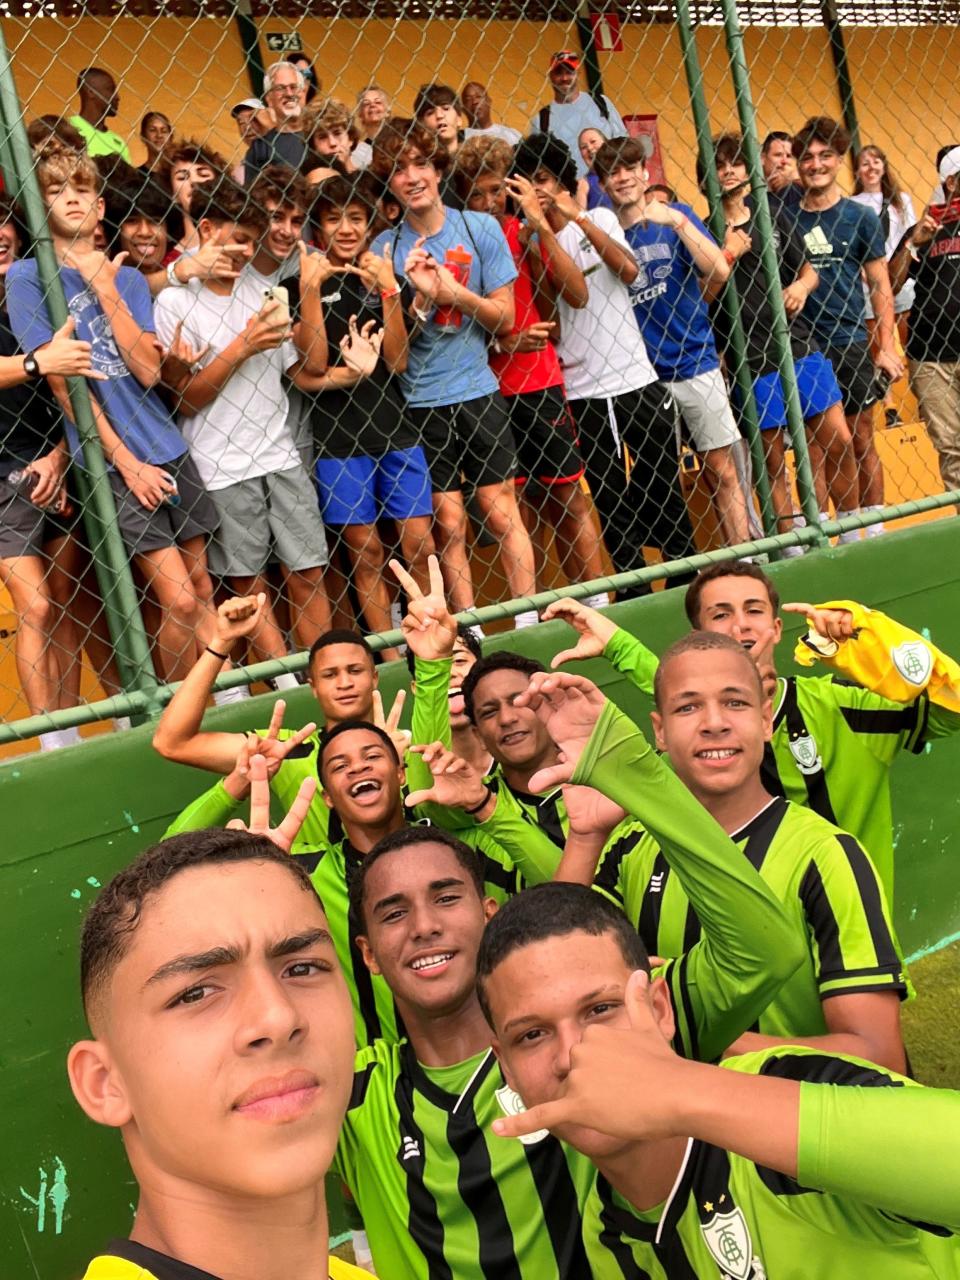 The Booker T. Washington boys soccer team (back) supports a local academy team during its game while in Brazil over Thanksgiving break during "The Brazilian Soccer Experience."